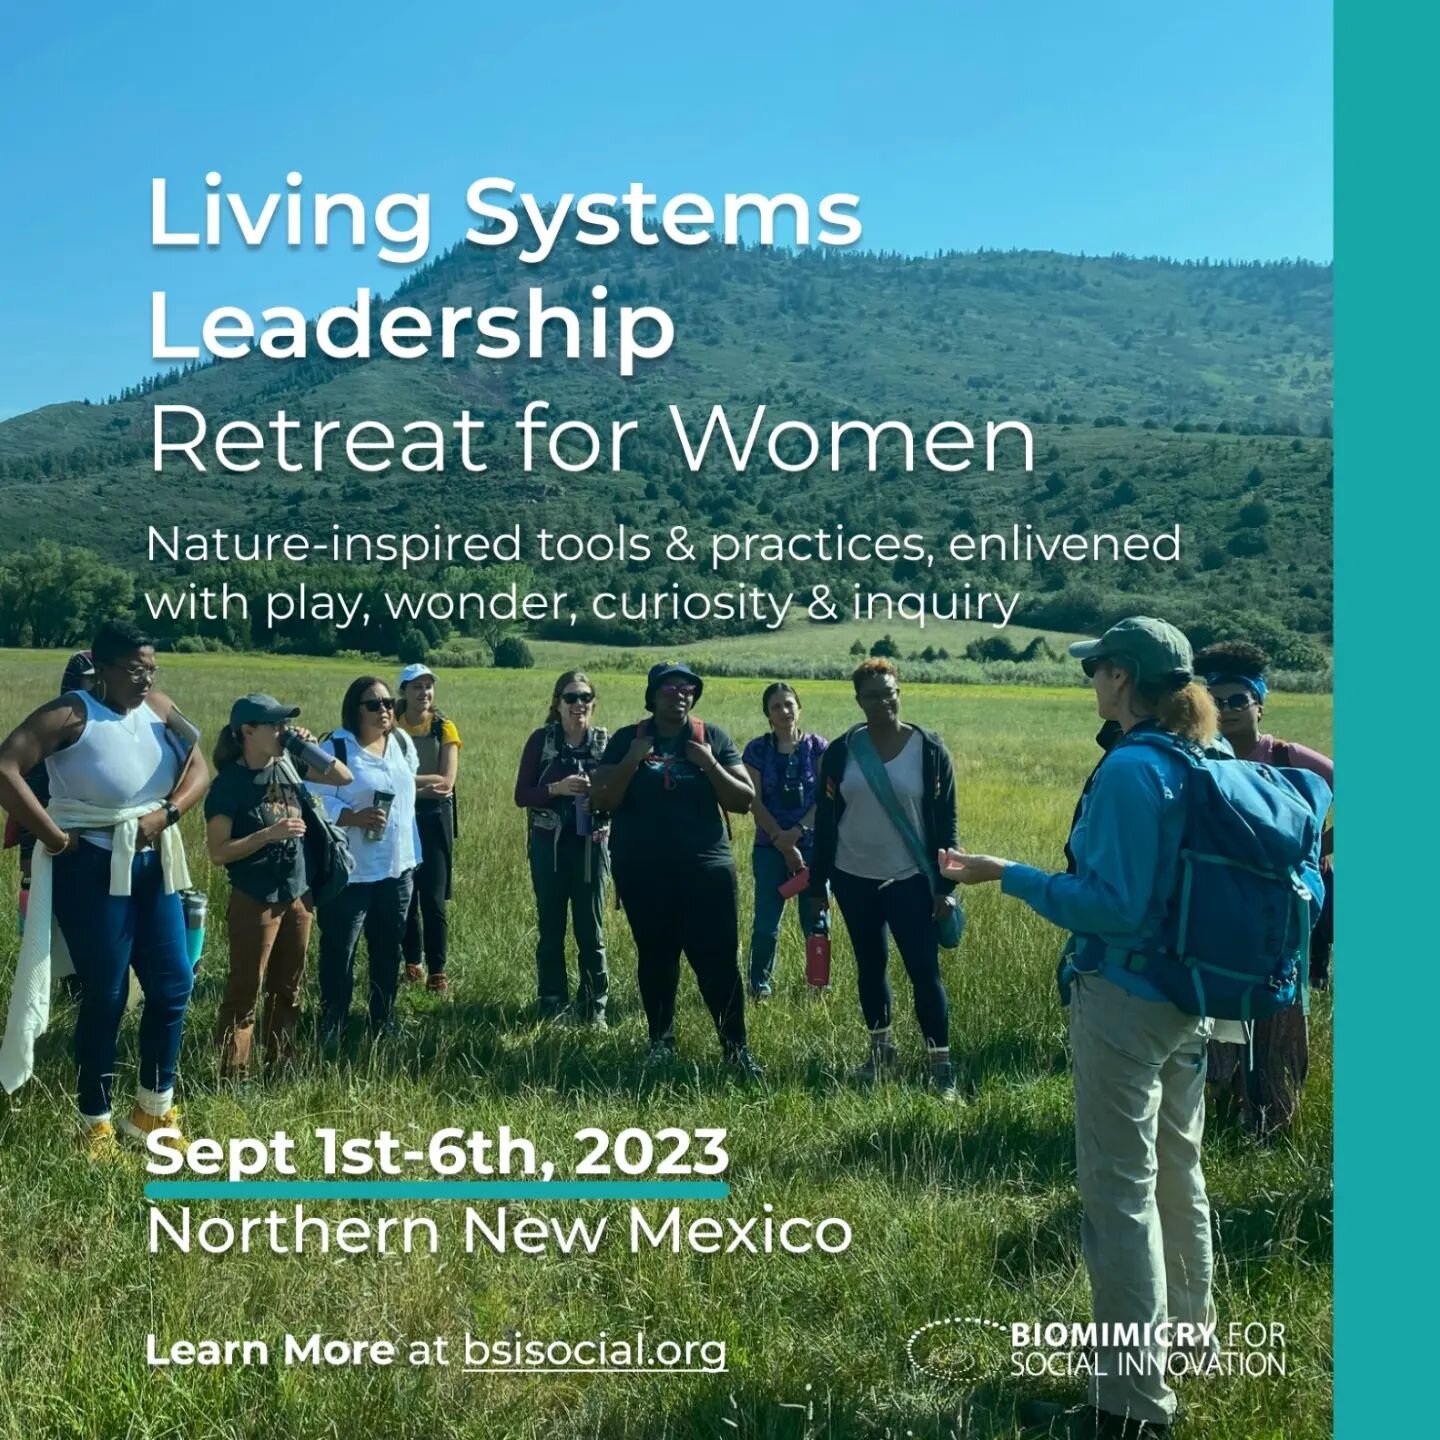 The call of our time is for women to step forward to lead in new ways, embodying approaches that are adaptive, resilient, collaborative, networked &ndash; practices that the natural world has masterfully evolved over nearly 4 billion years. With natu